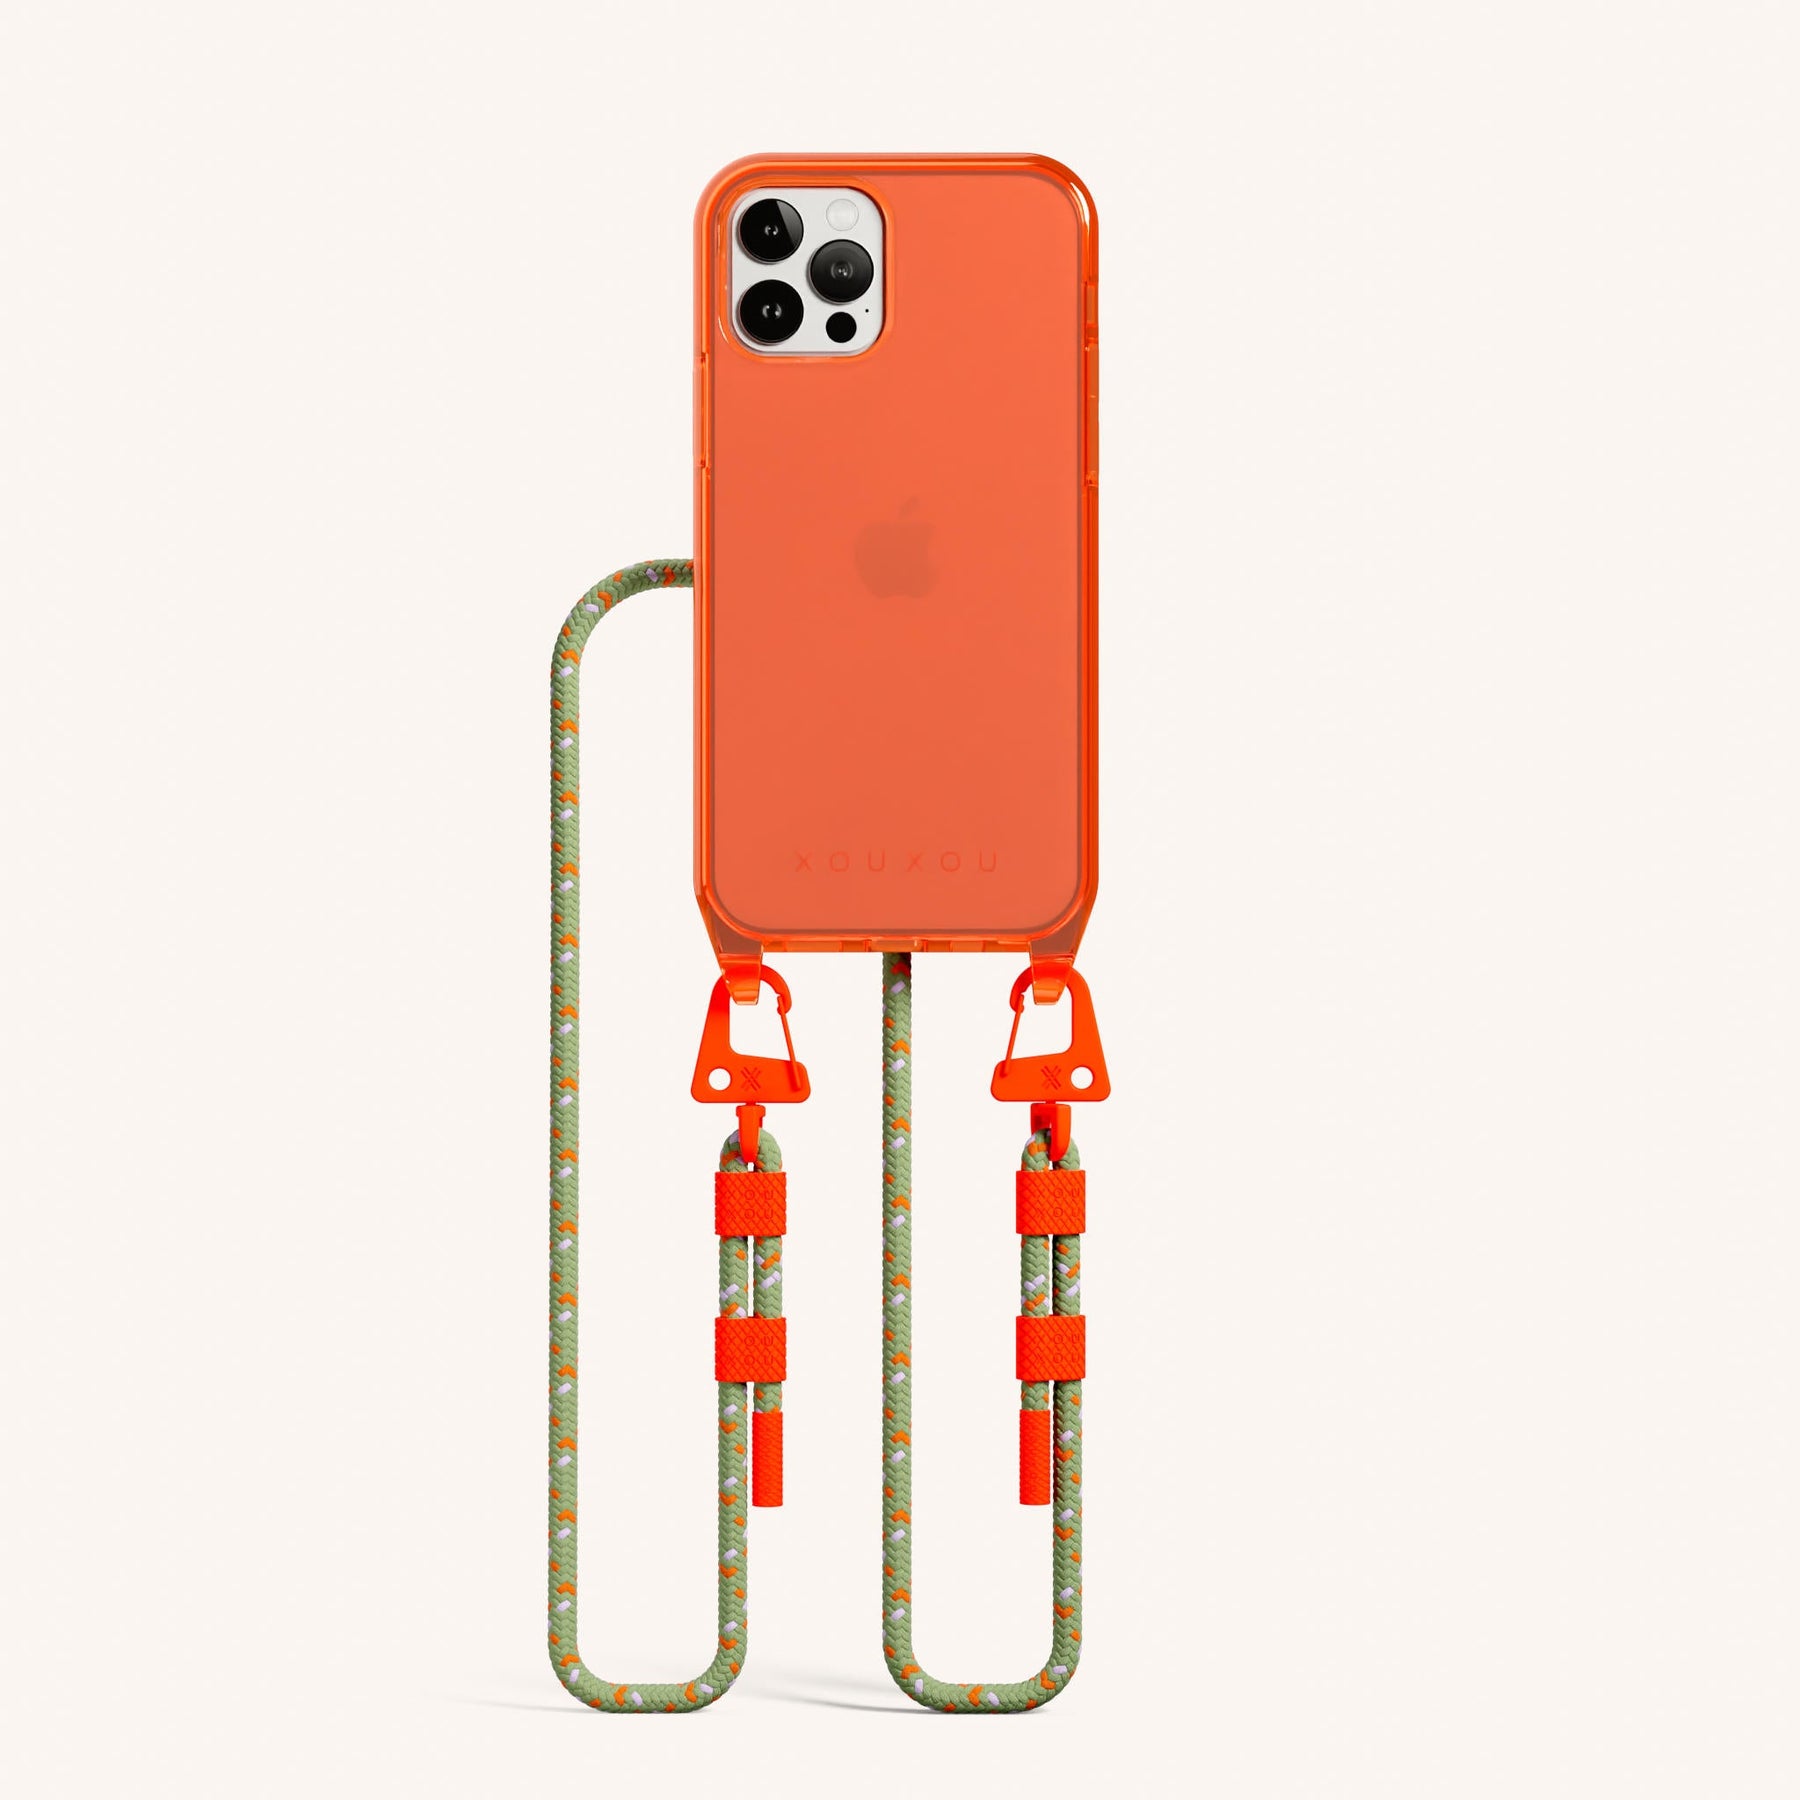 Phone Necklace with Carabiner Rope in Neon Orange Clear + Orange Camouflage